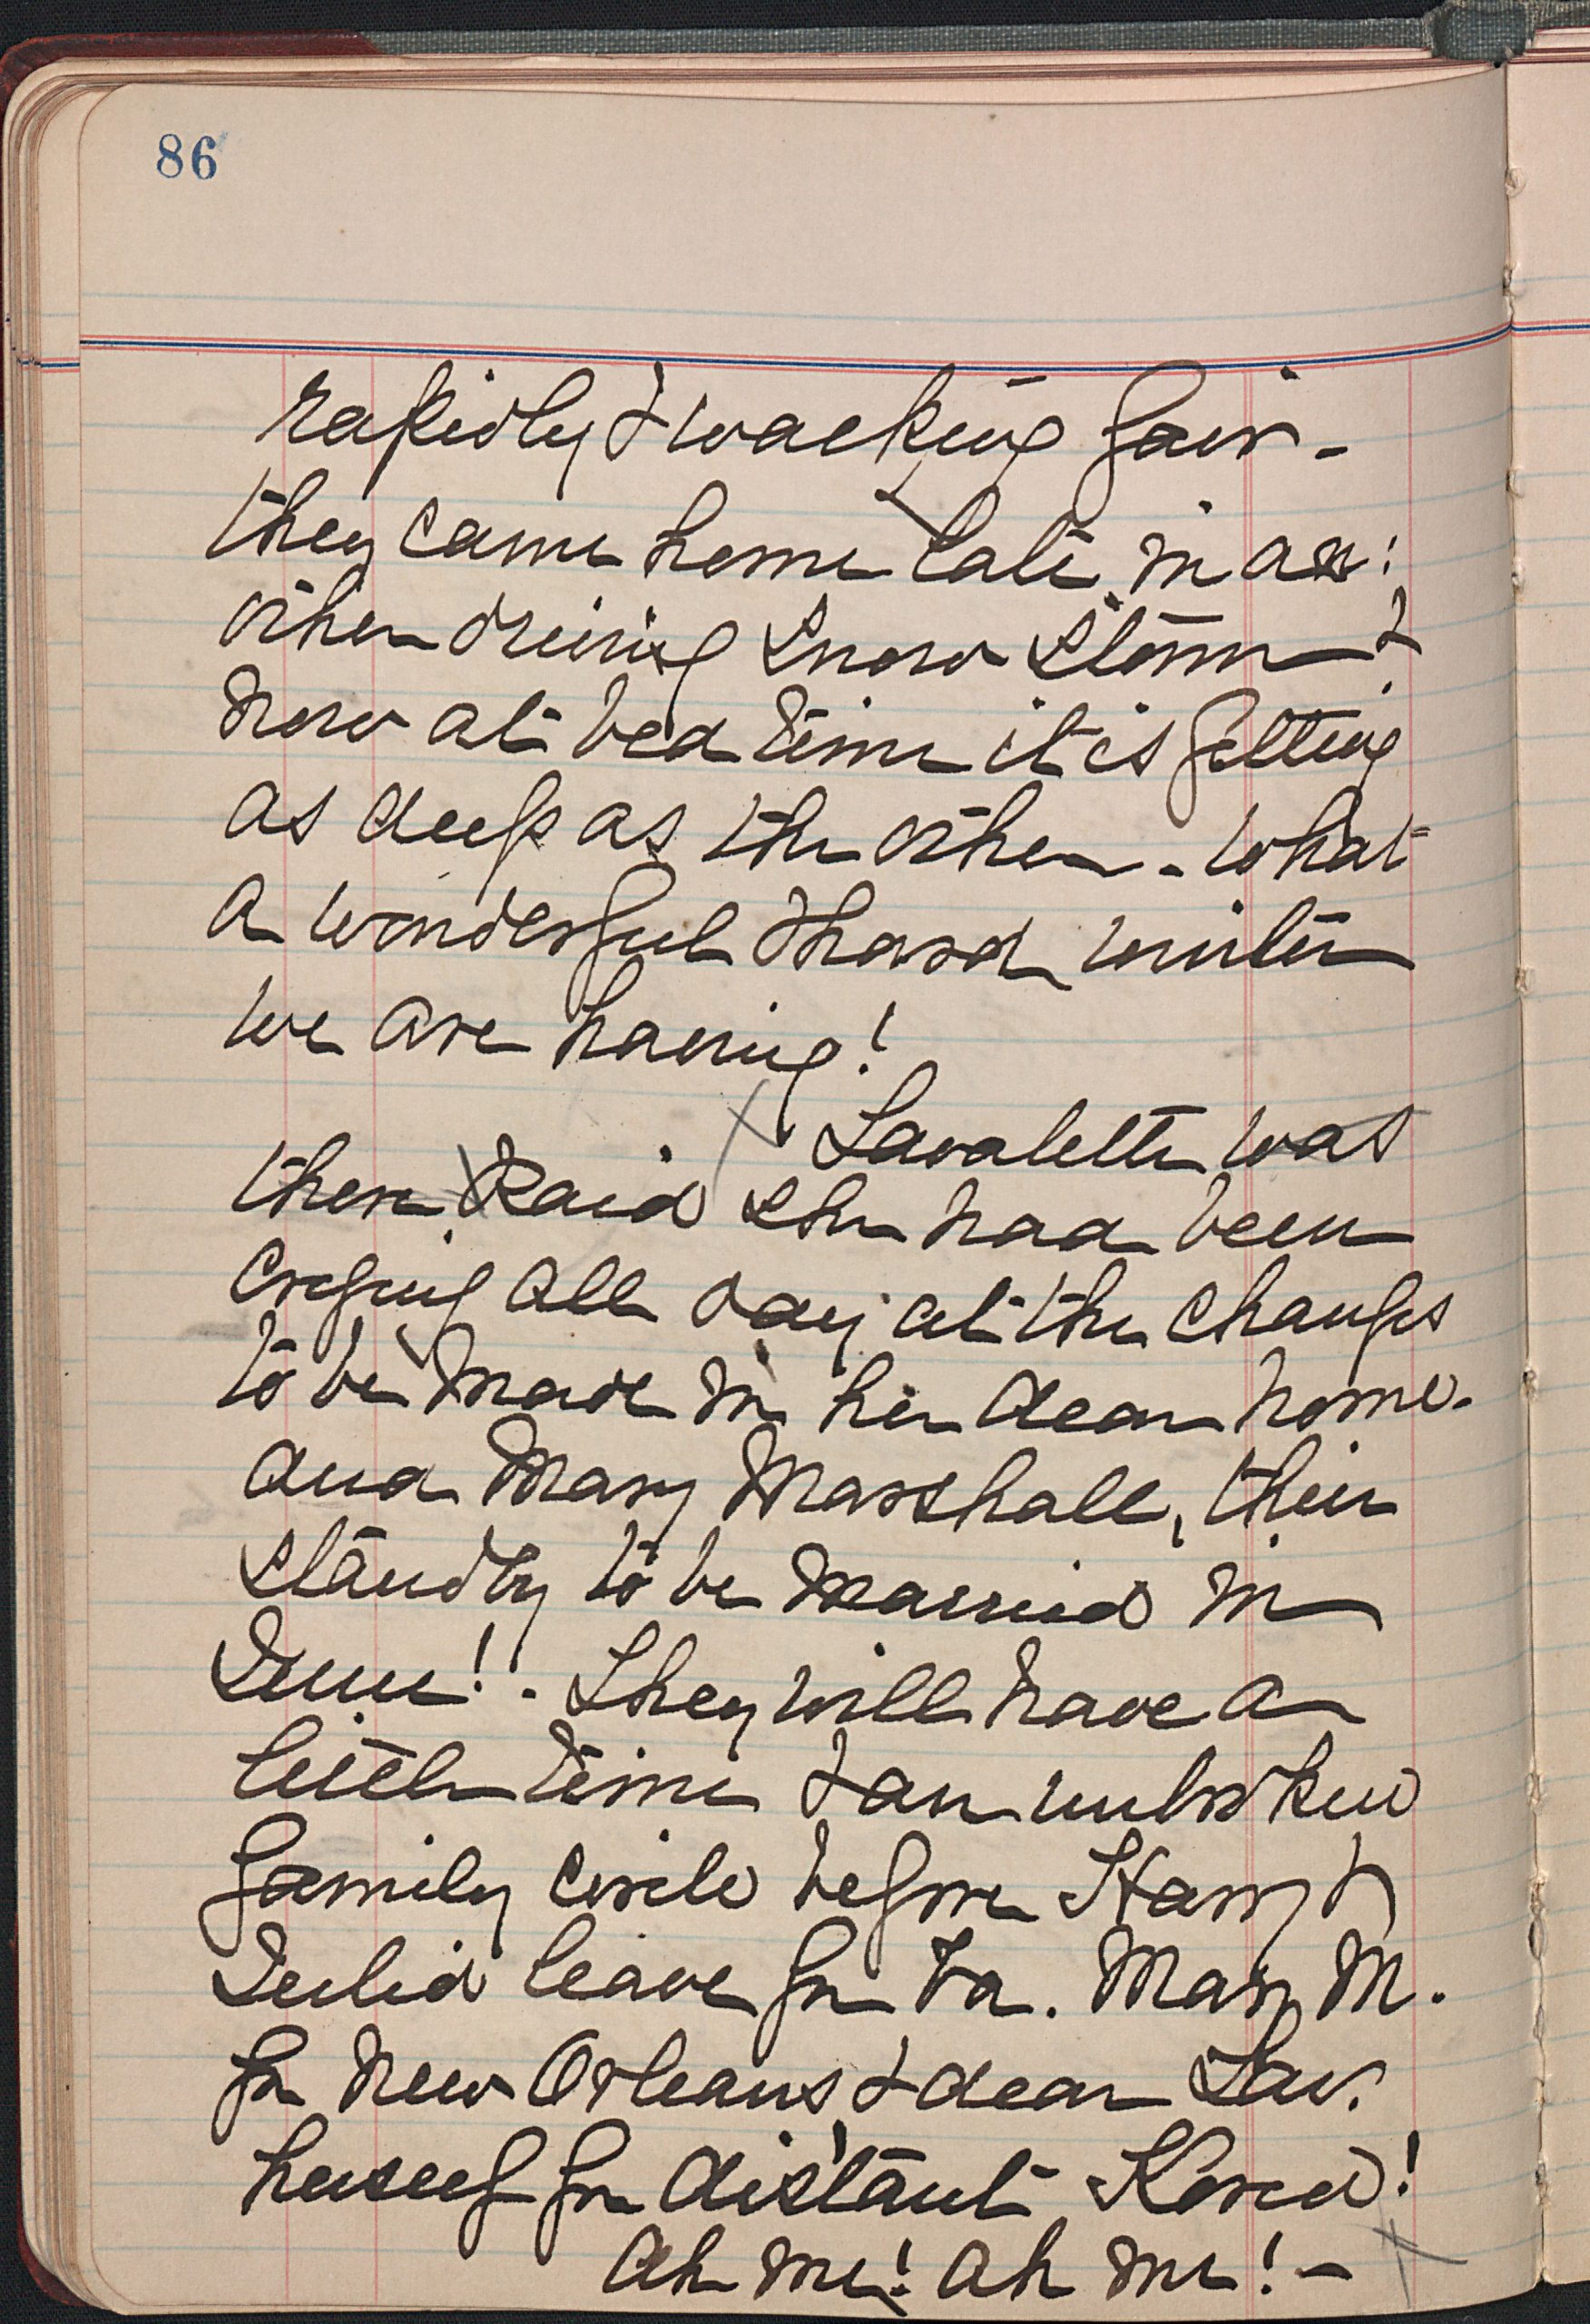 A diary page from the collection of Mrs. Smith.